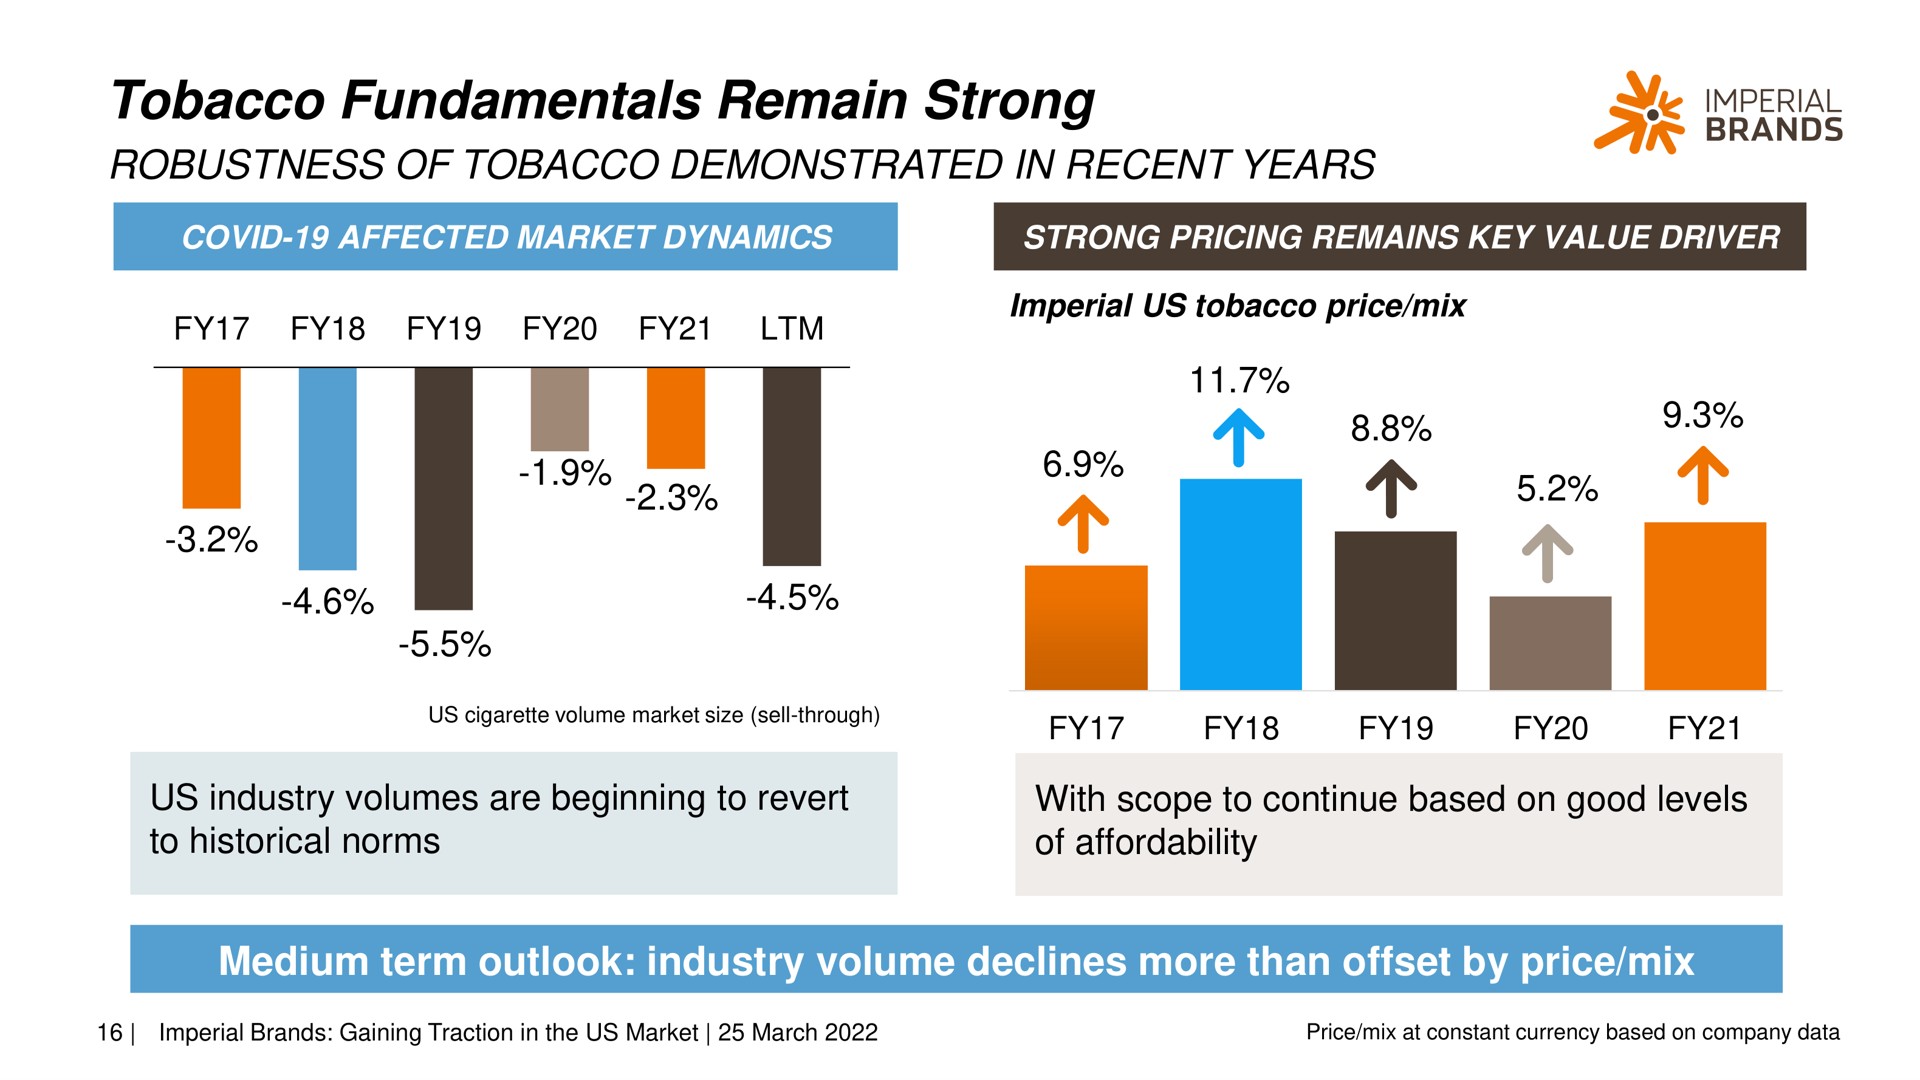 tobacco fundamentals remain strong robustness of demonstrated in recent years a imperial | Imperial Brands